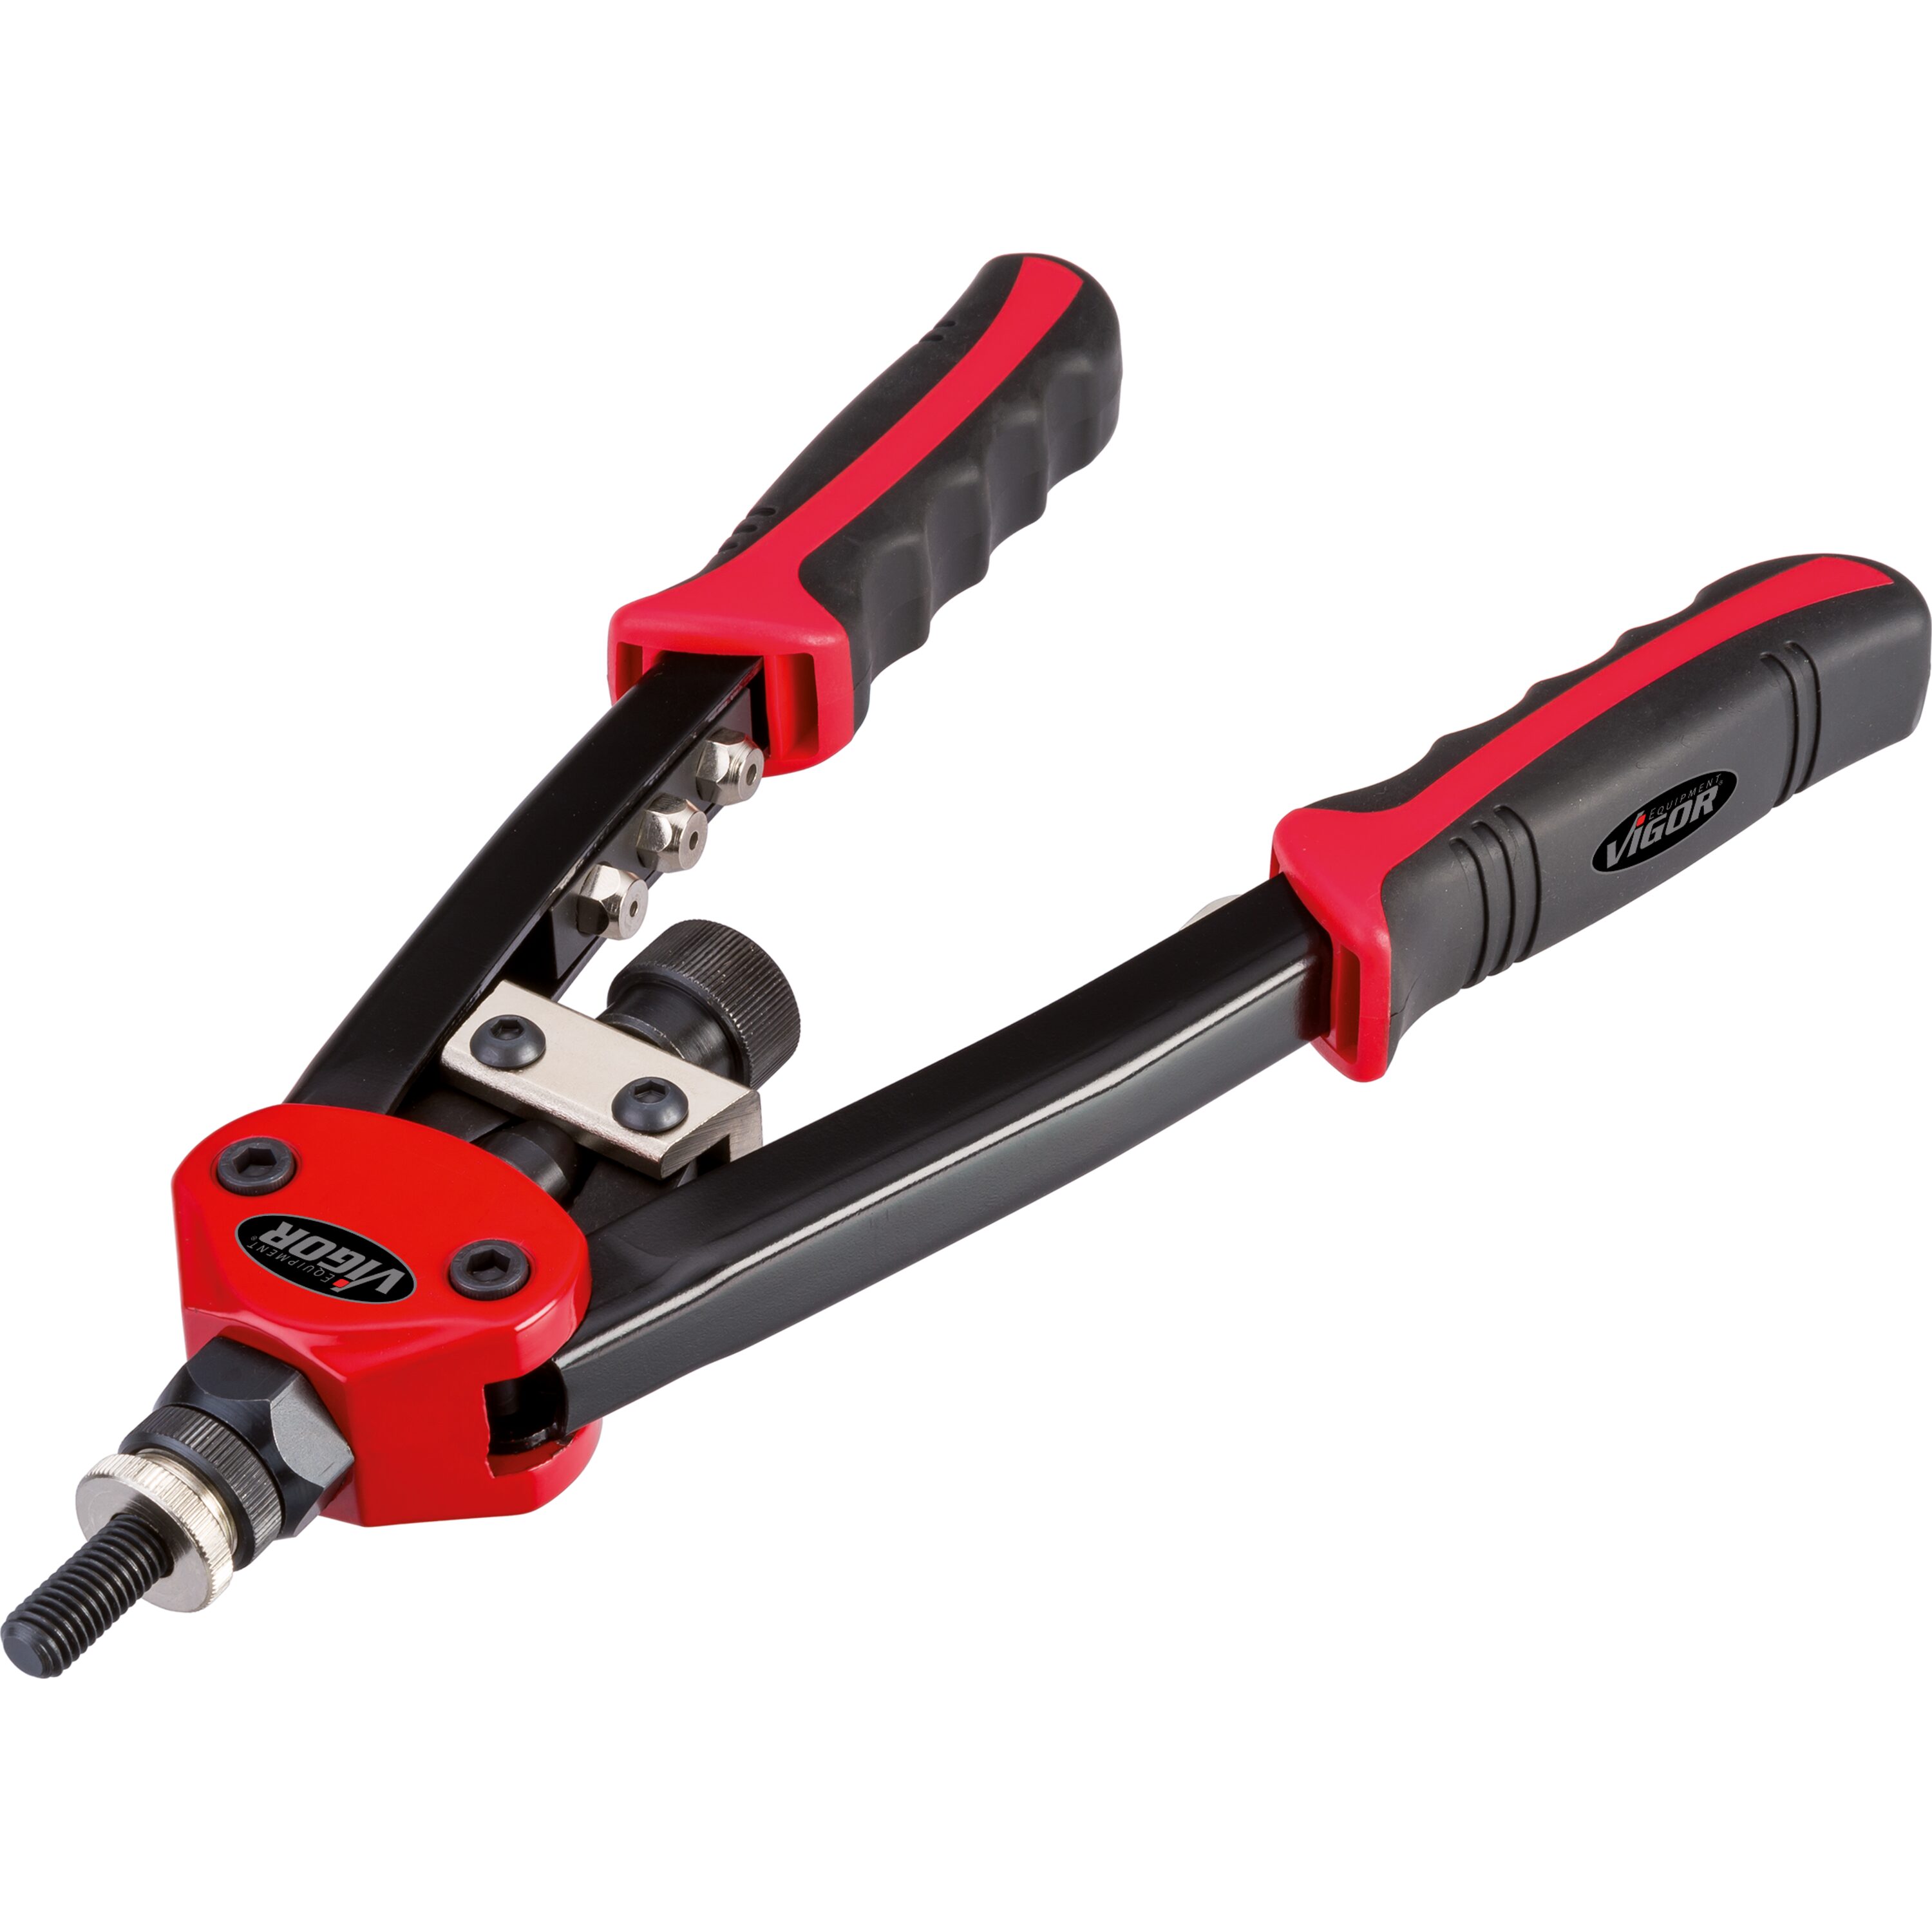 Hand riveting tool for blind rivets and rivet nuts ∙ universal